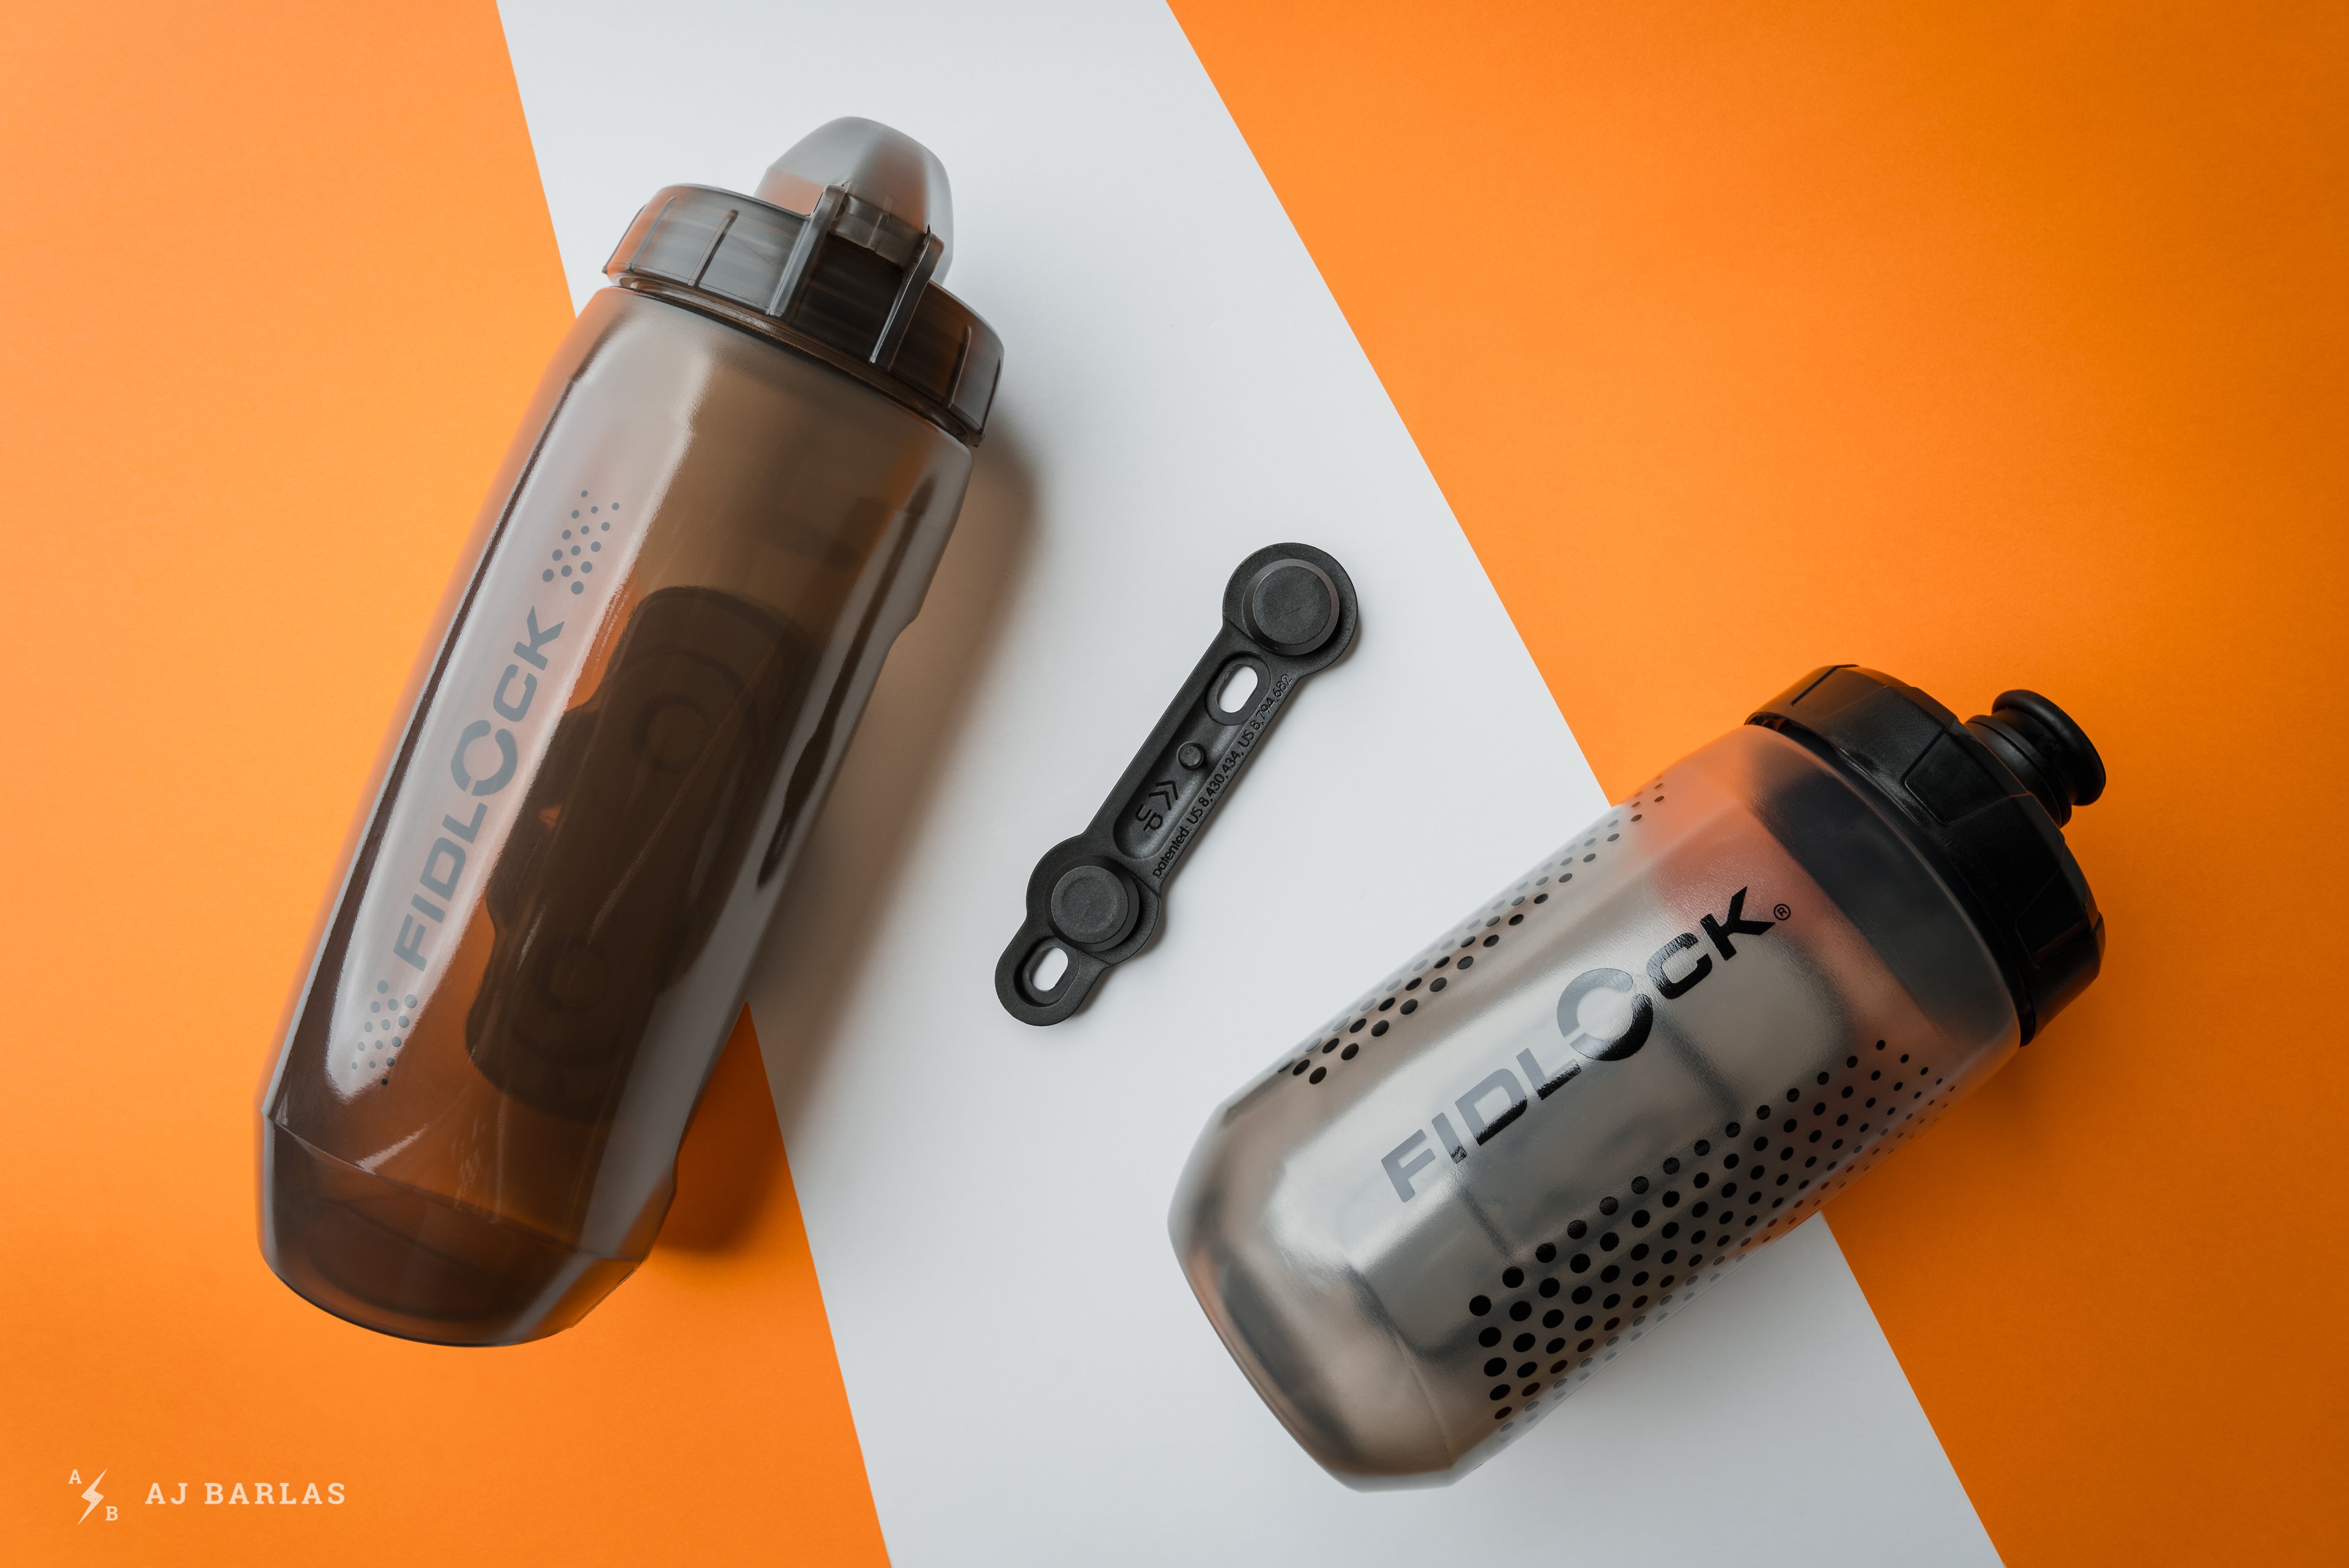 This magnetic bottle holder strap keeps your water bottle off the